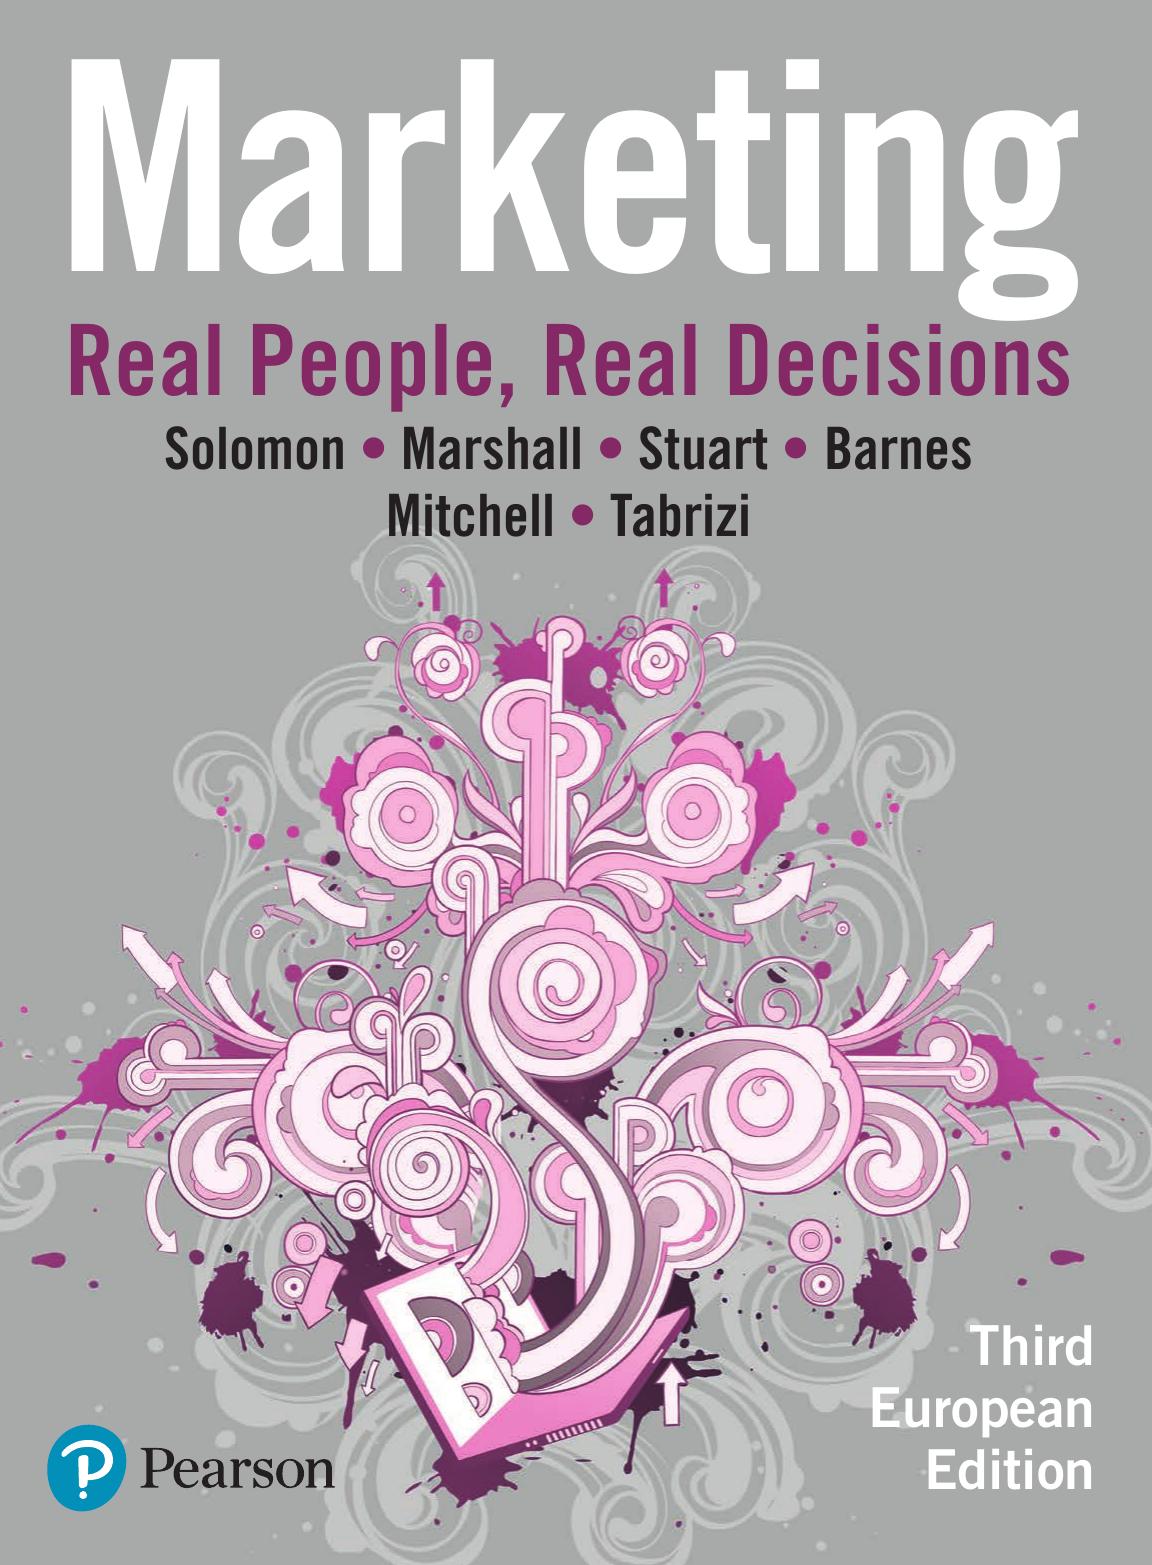 Marketing Real People, Real Decisions, 3rd European Edition by M. Stuart, Bradley R. Barnes, Vincent W. Mitchell, Wendy Tabrizi